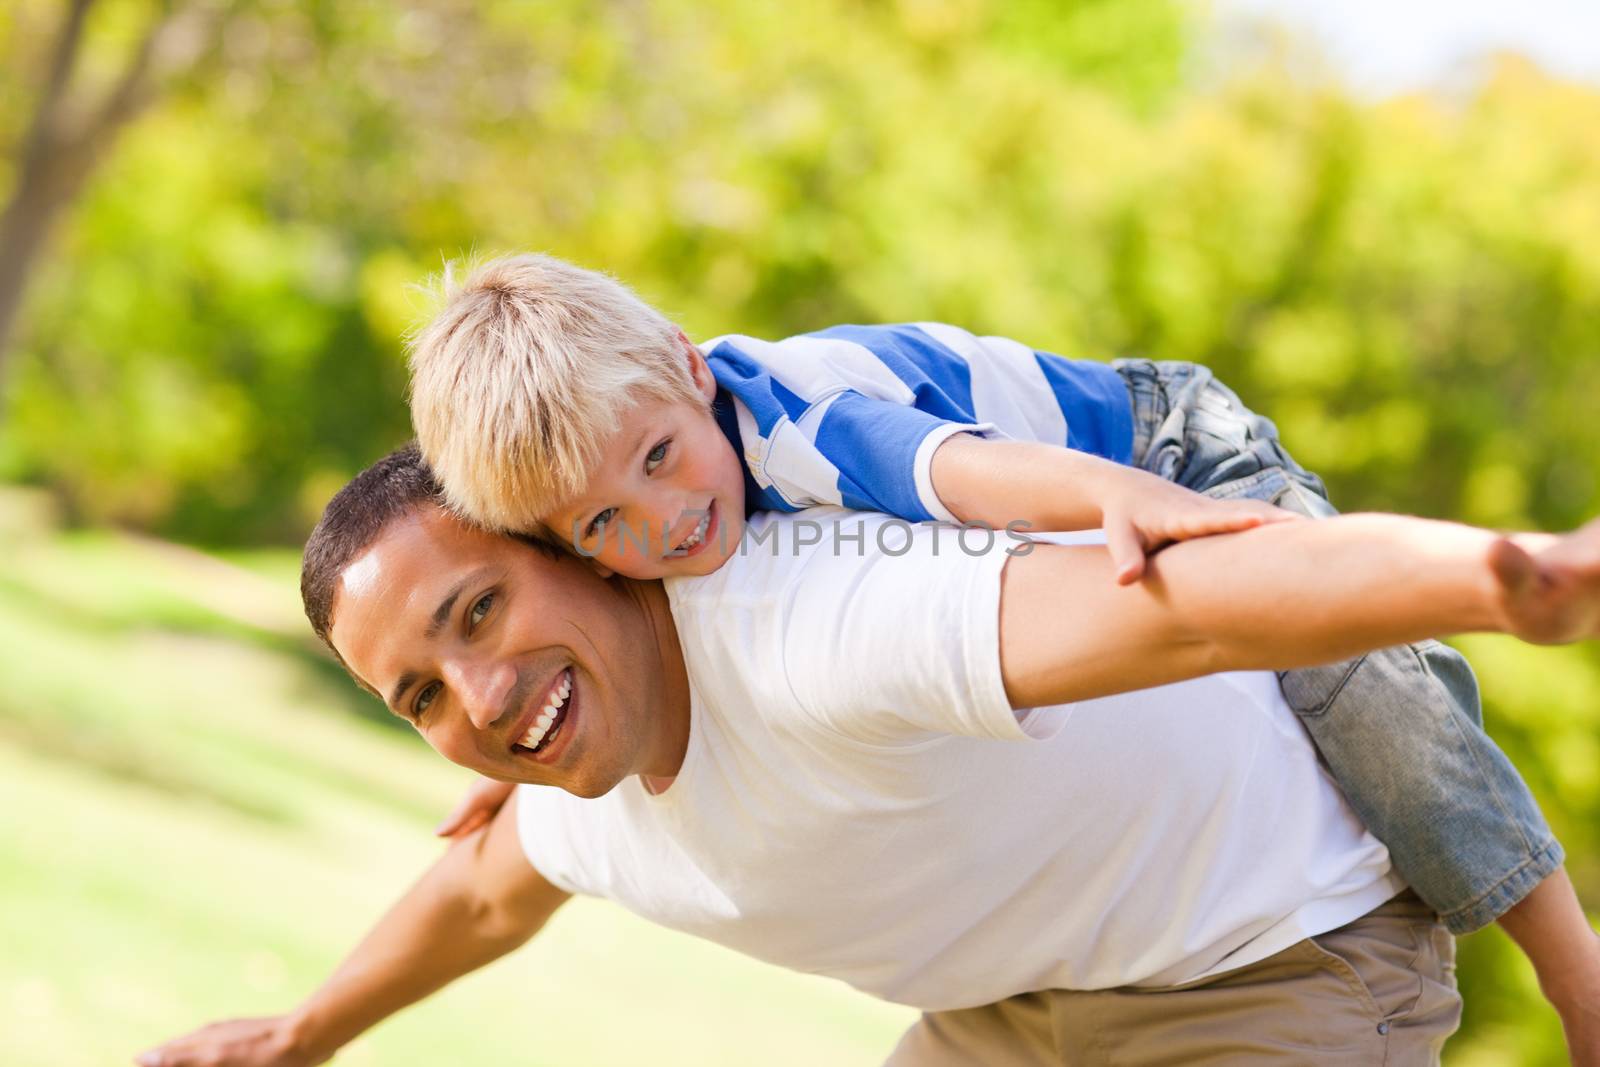 Son playing with his father in the park during the summer 